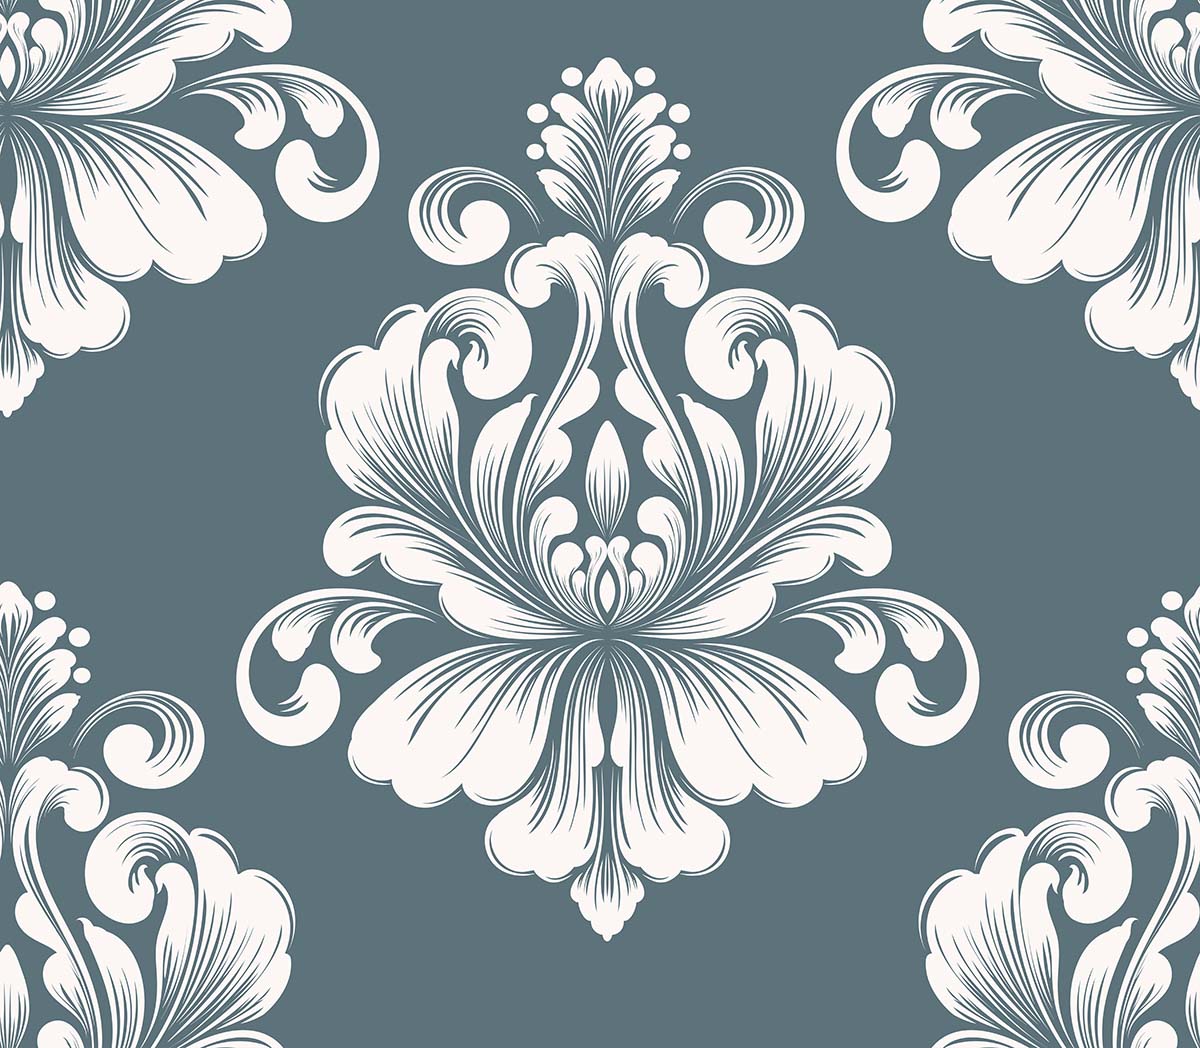 A pattern of white and blue floral designs